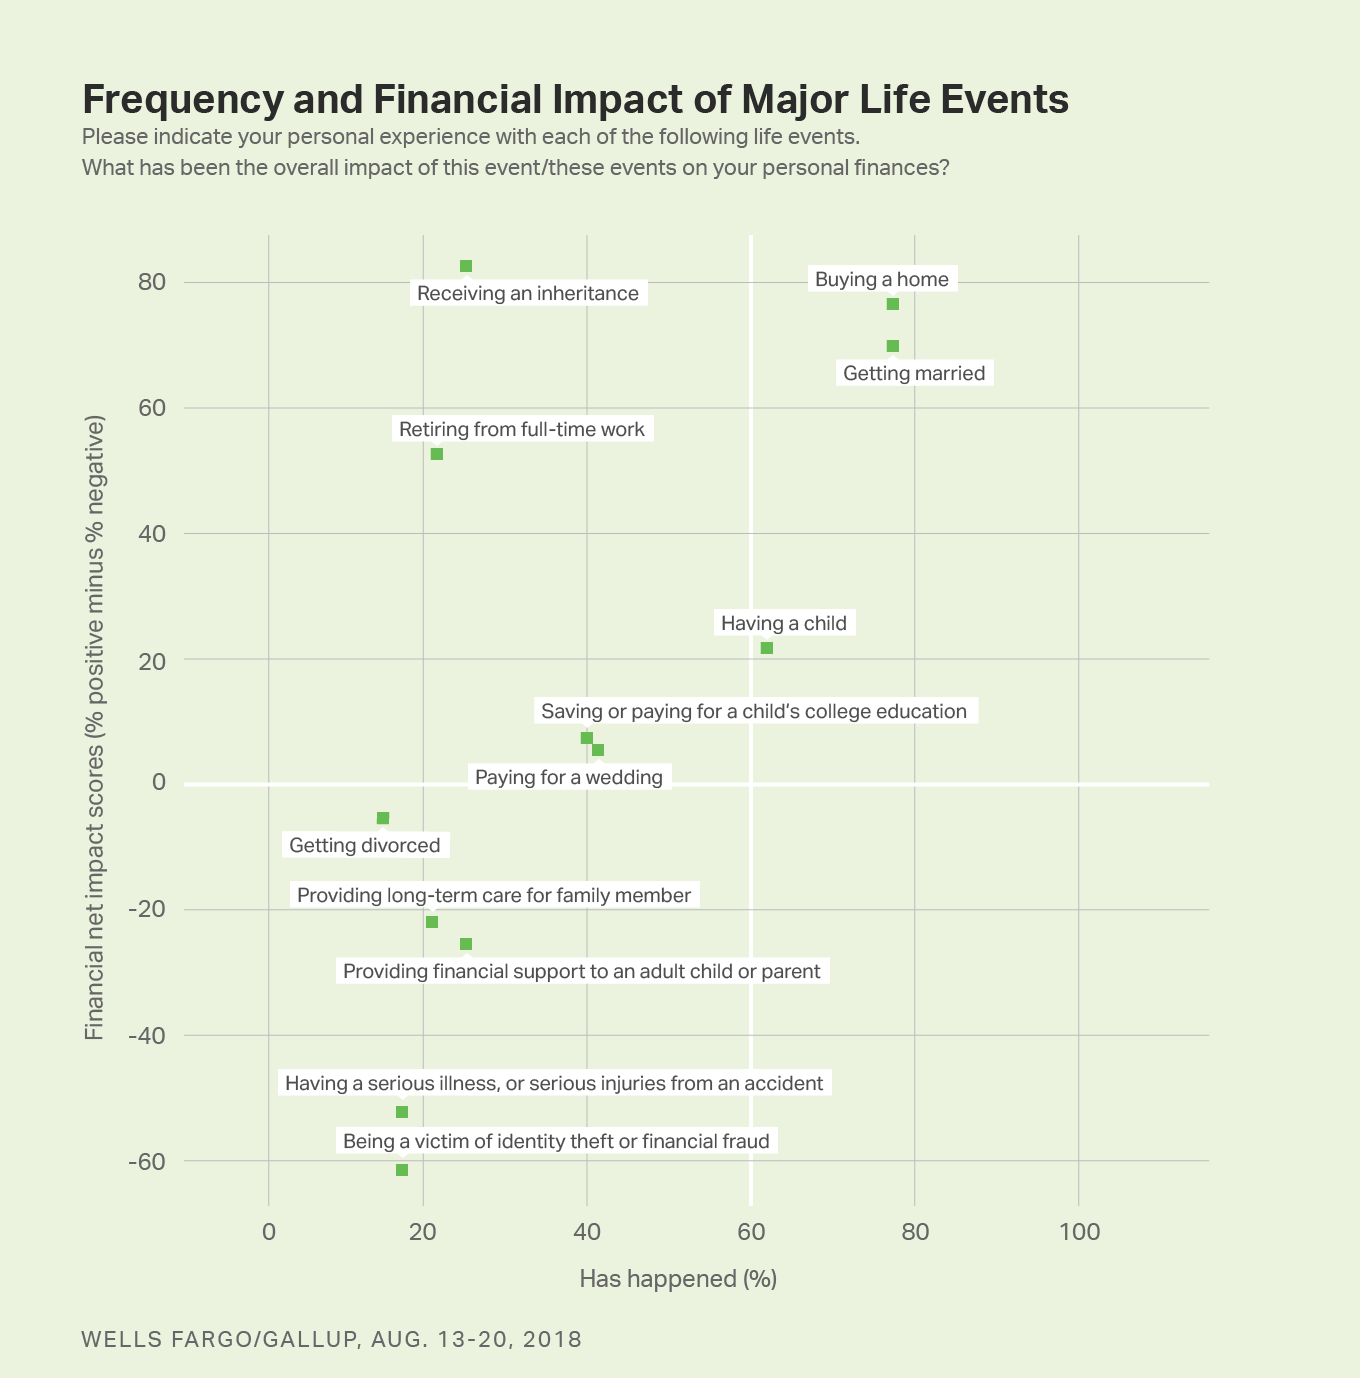 Scatter plot. The frequency and financial impact of 14 major life events on U.S. investors.